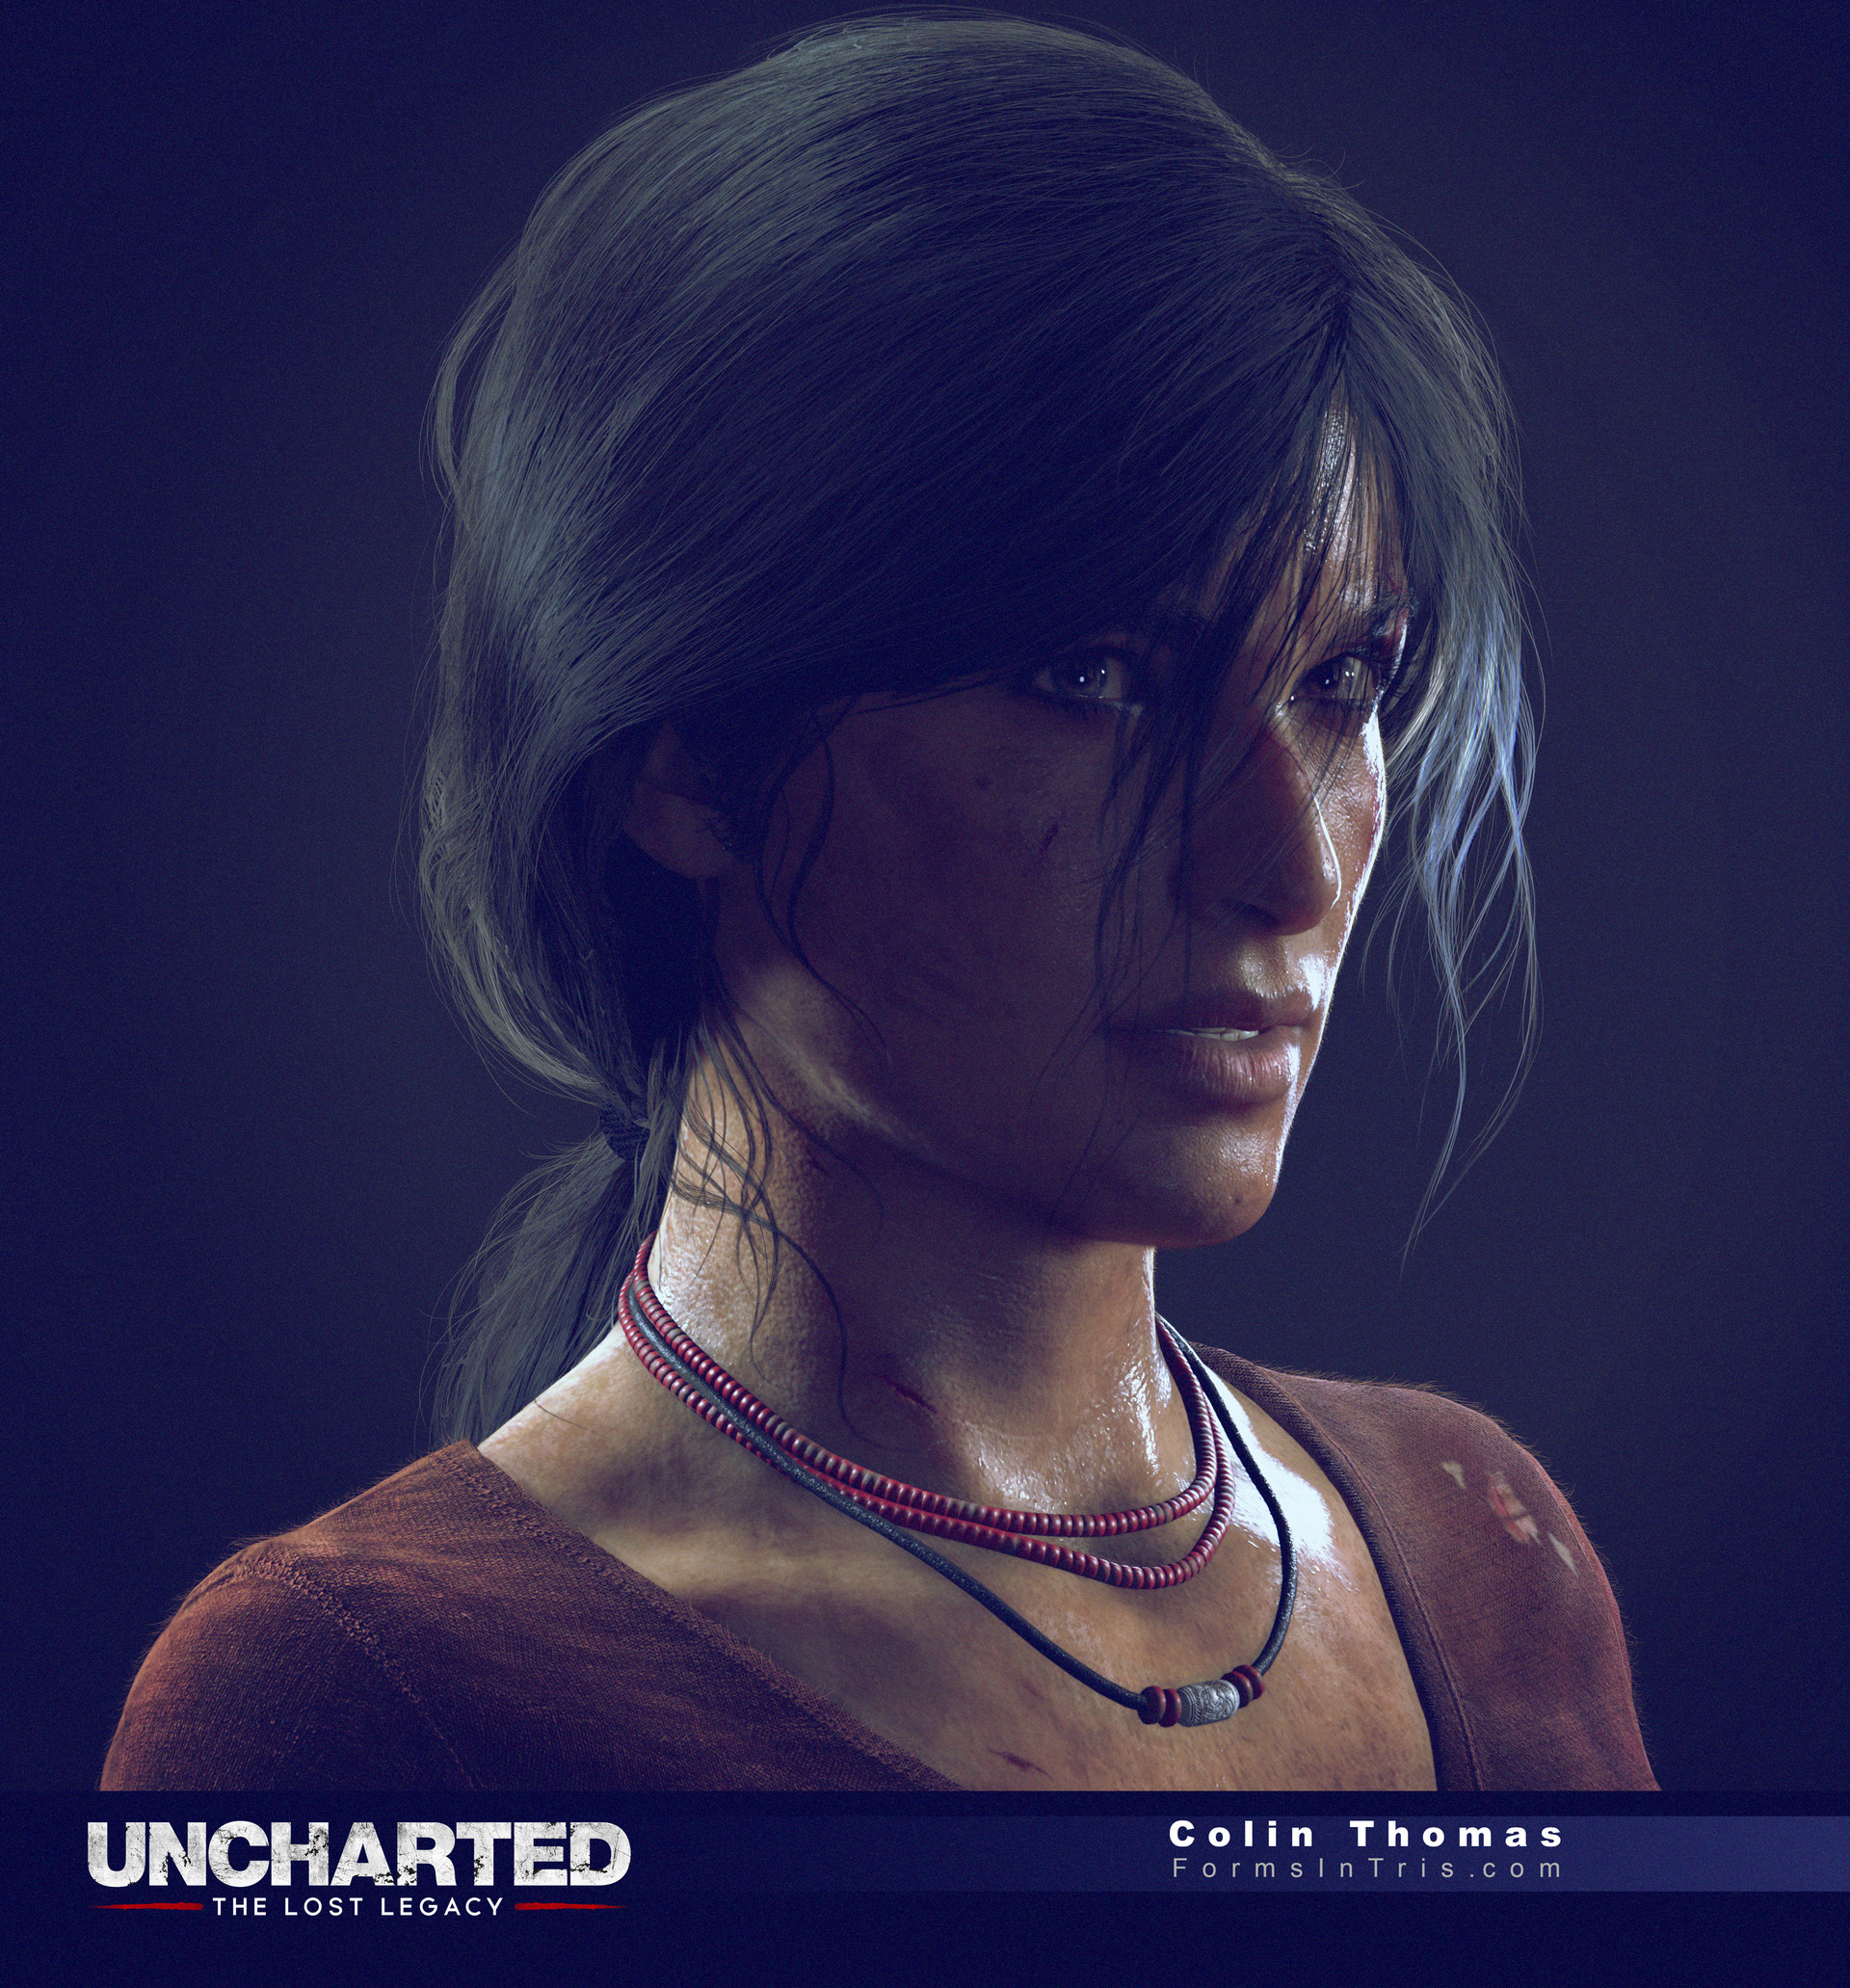 The Art Of Uncharted: The Lost Legacy